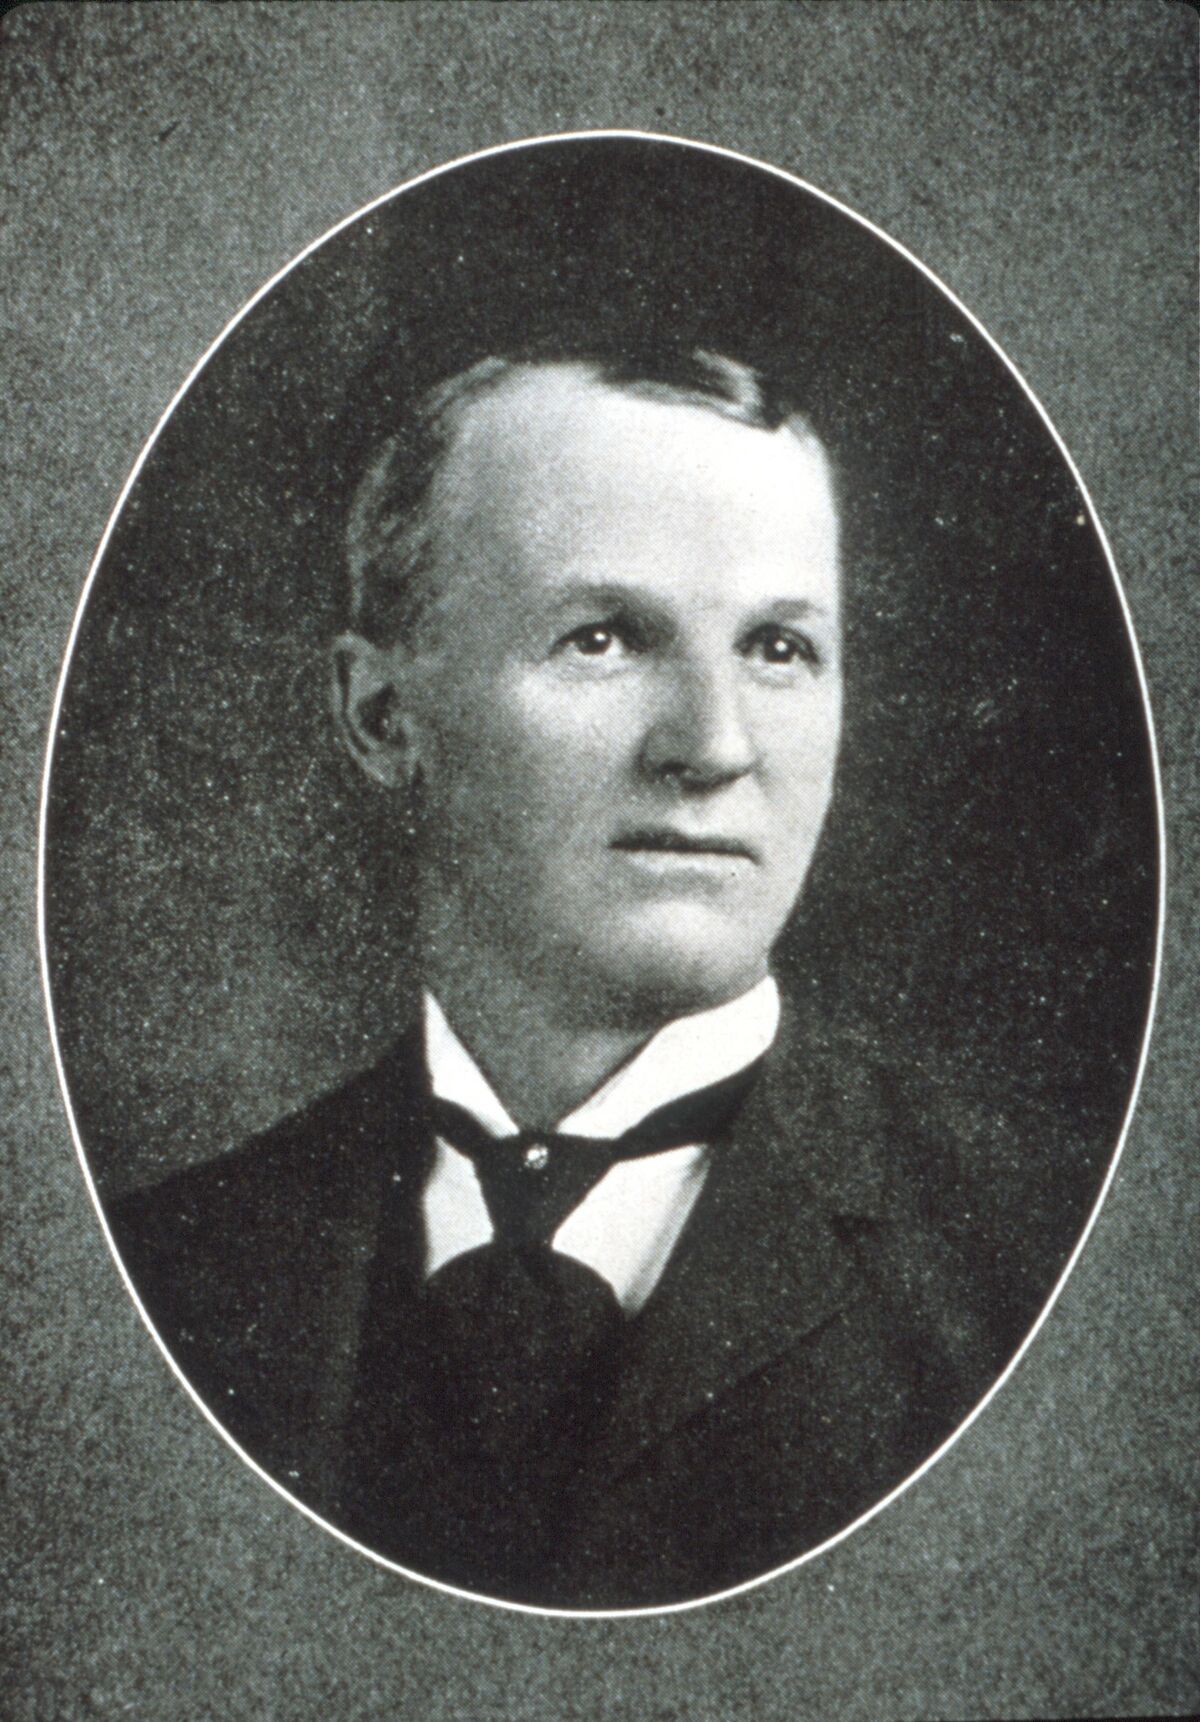 Portrait of F.D. McCully, the founder of the town of Joseph.